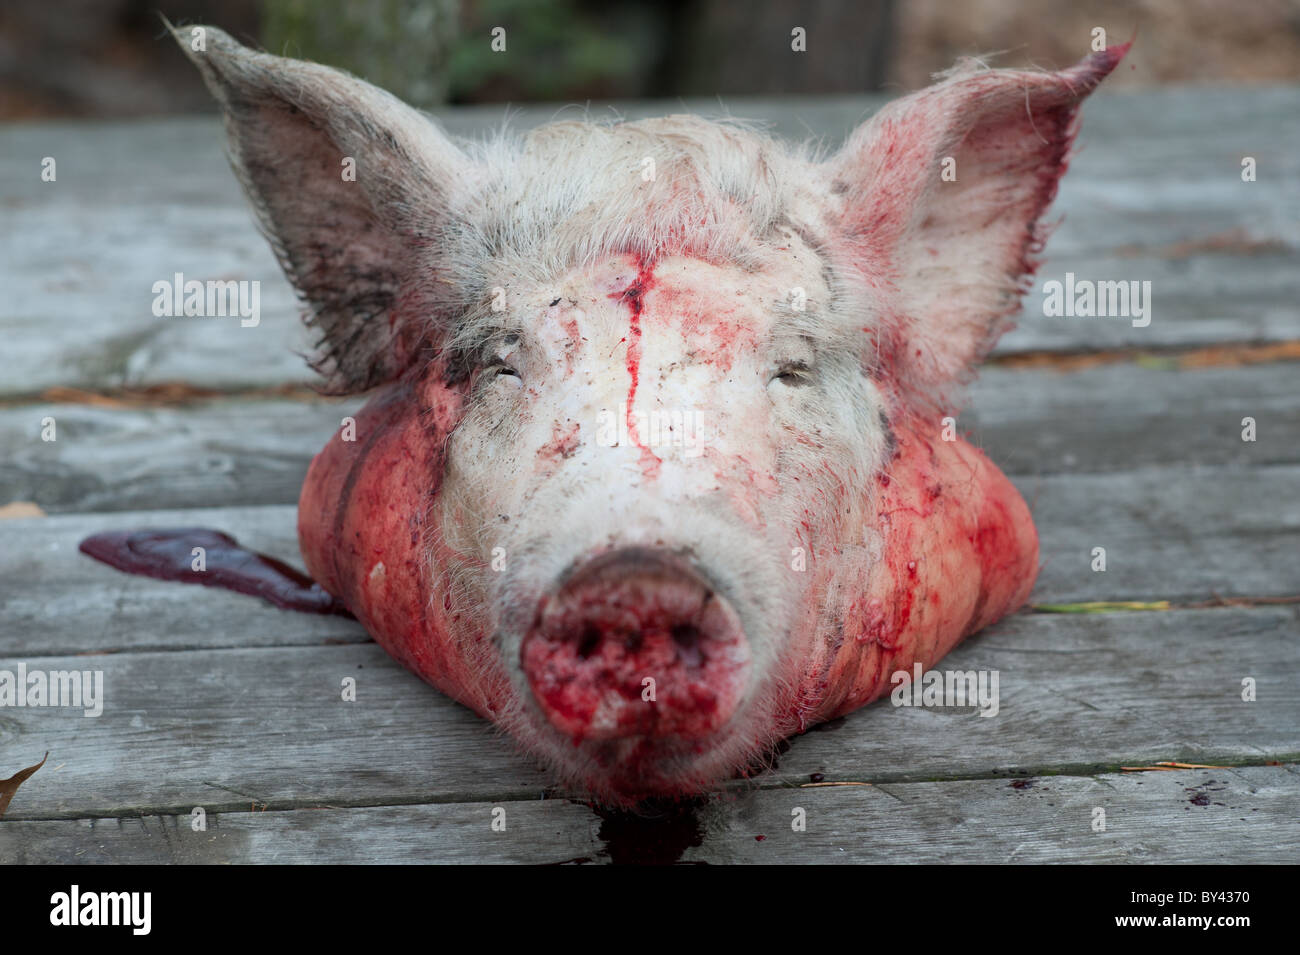 Bloody decapitated head of a pig Stock Photo